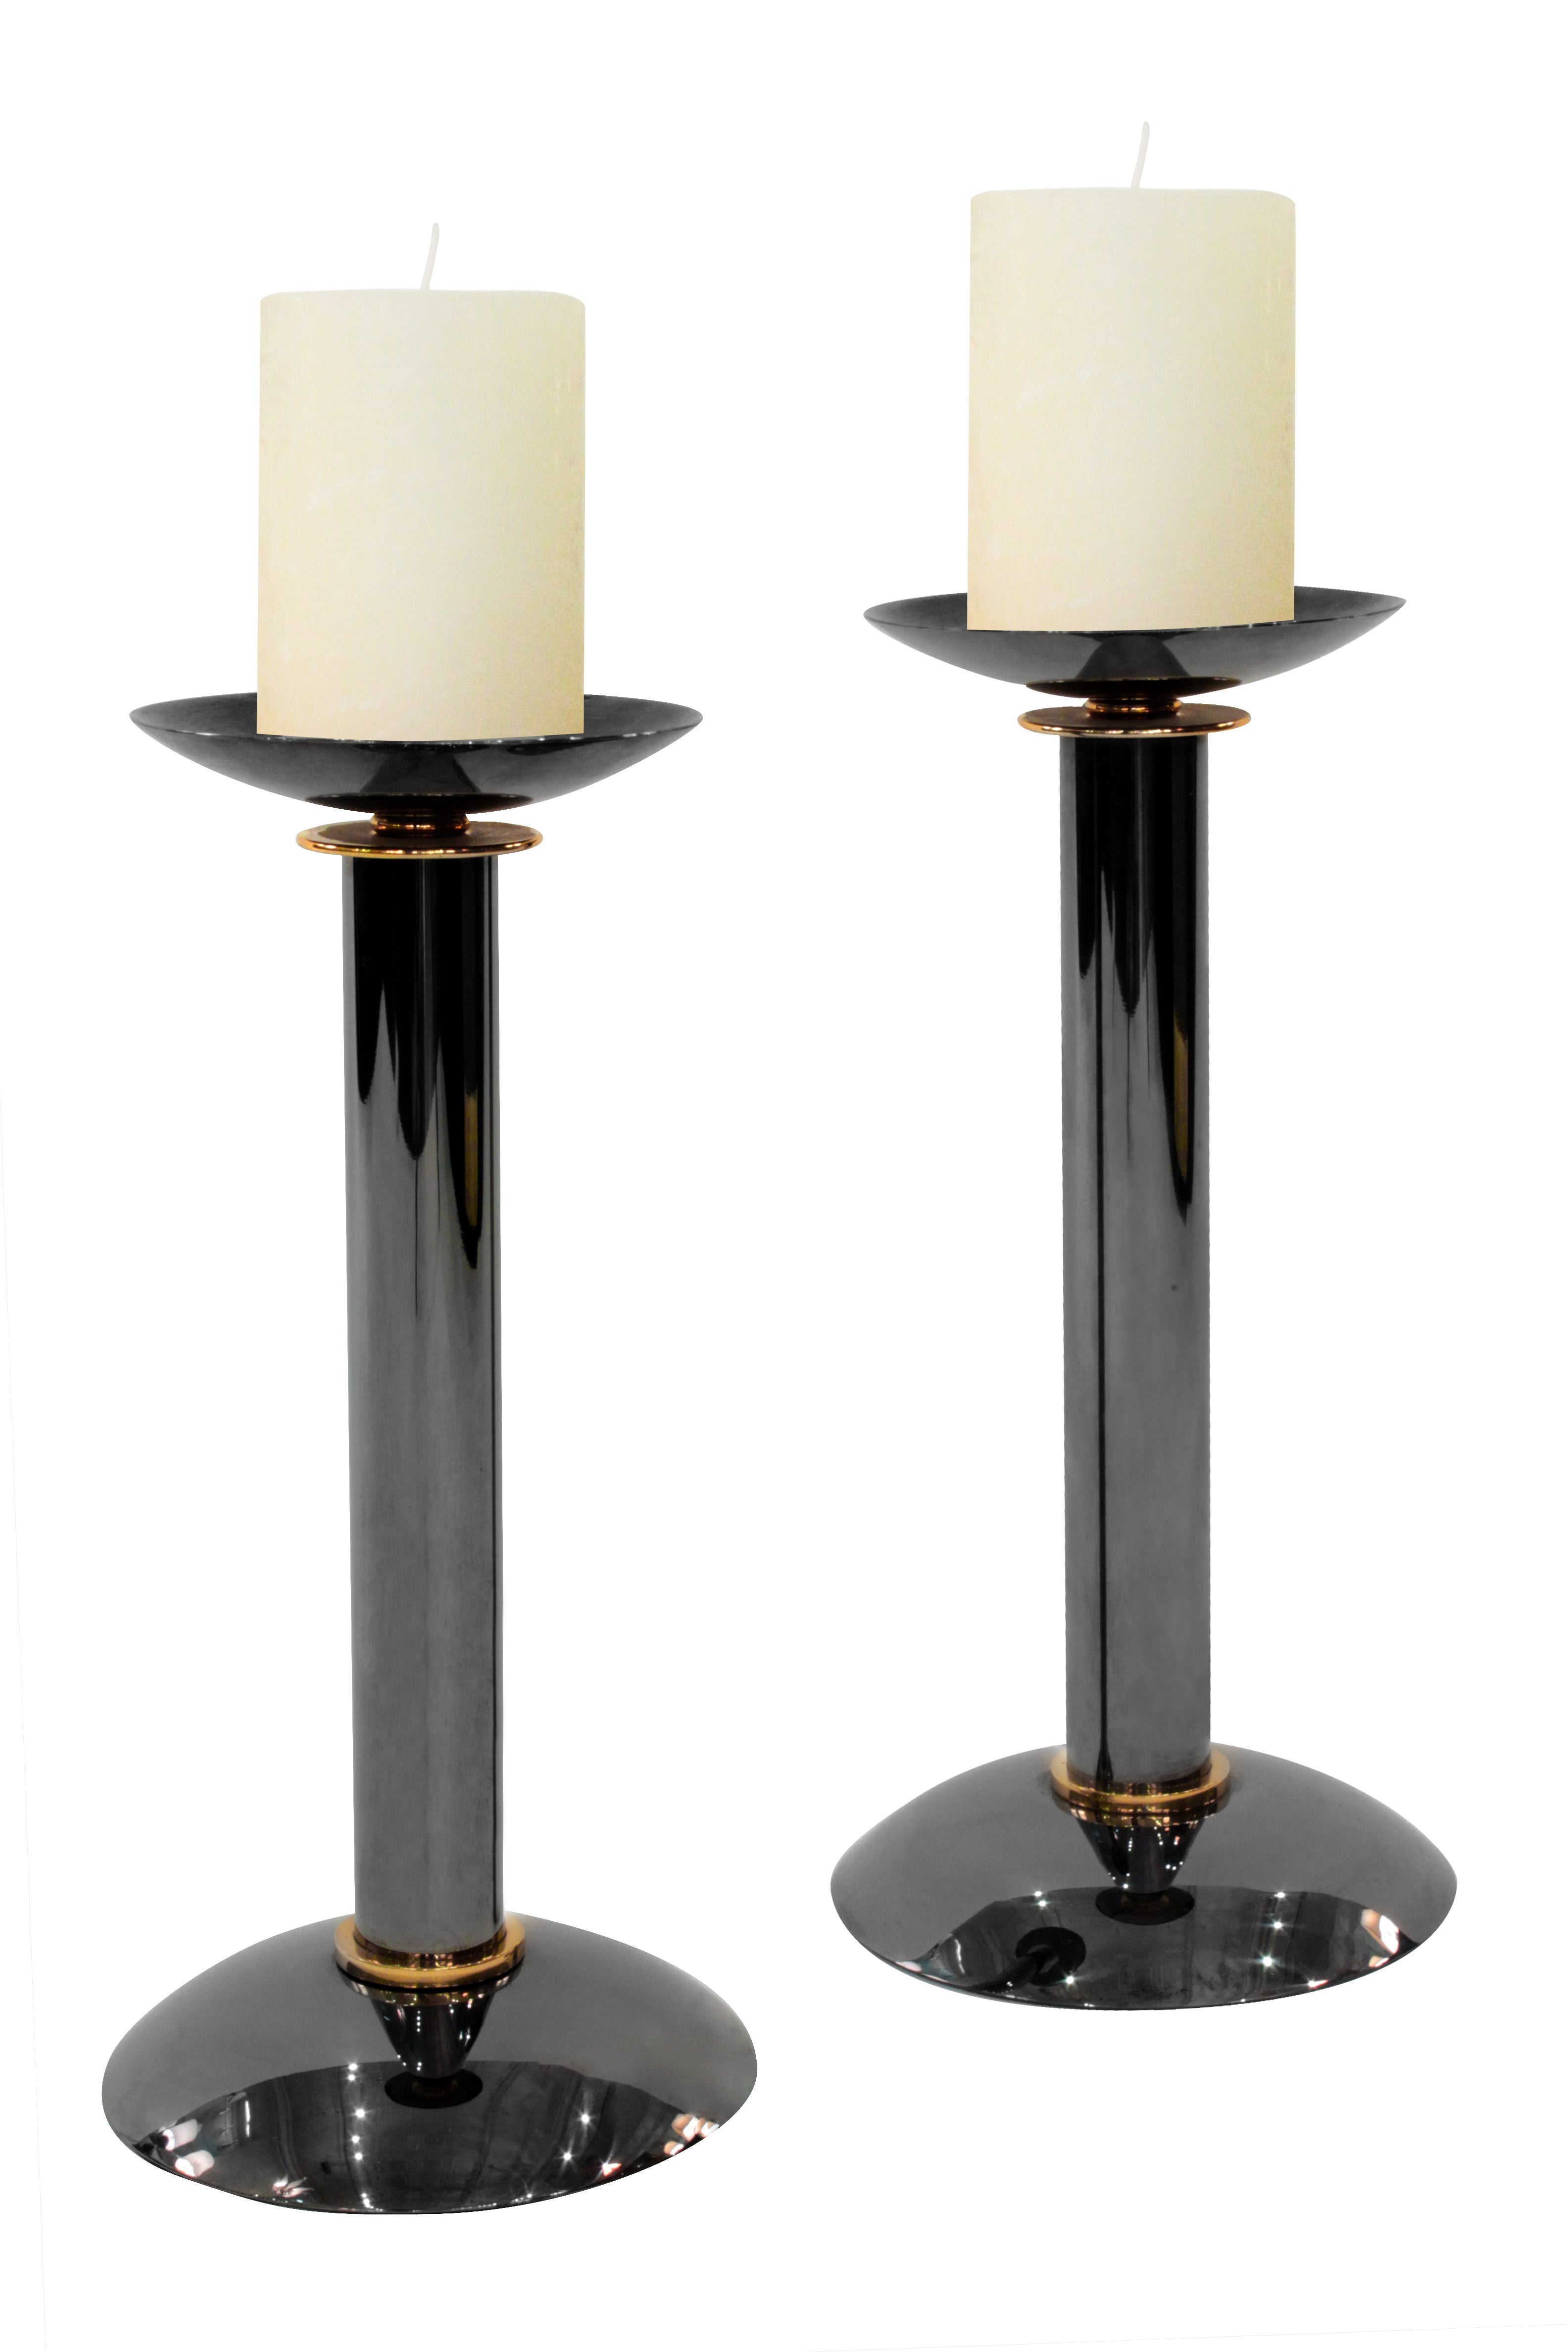 Karl Springer Pair of Candle Holders in Gunmetal and Brass 1970s